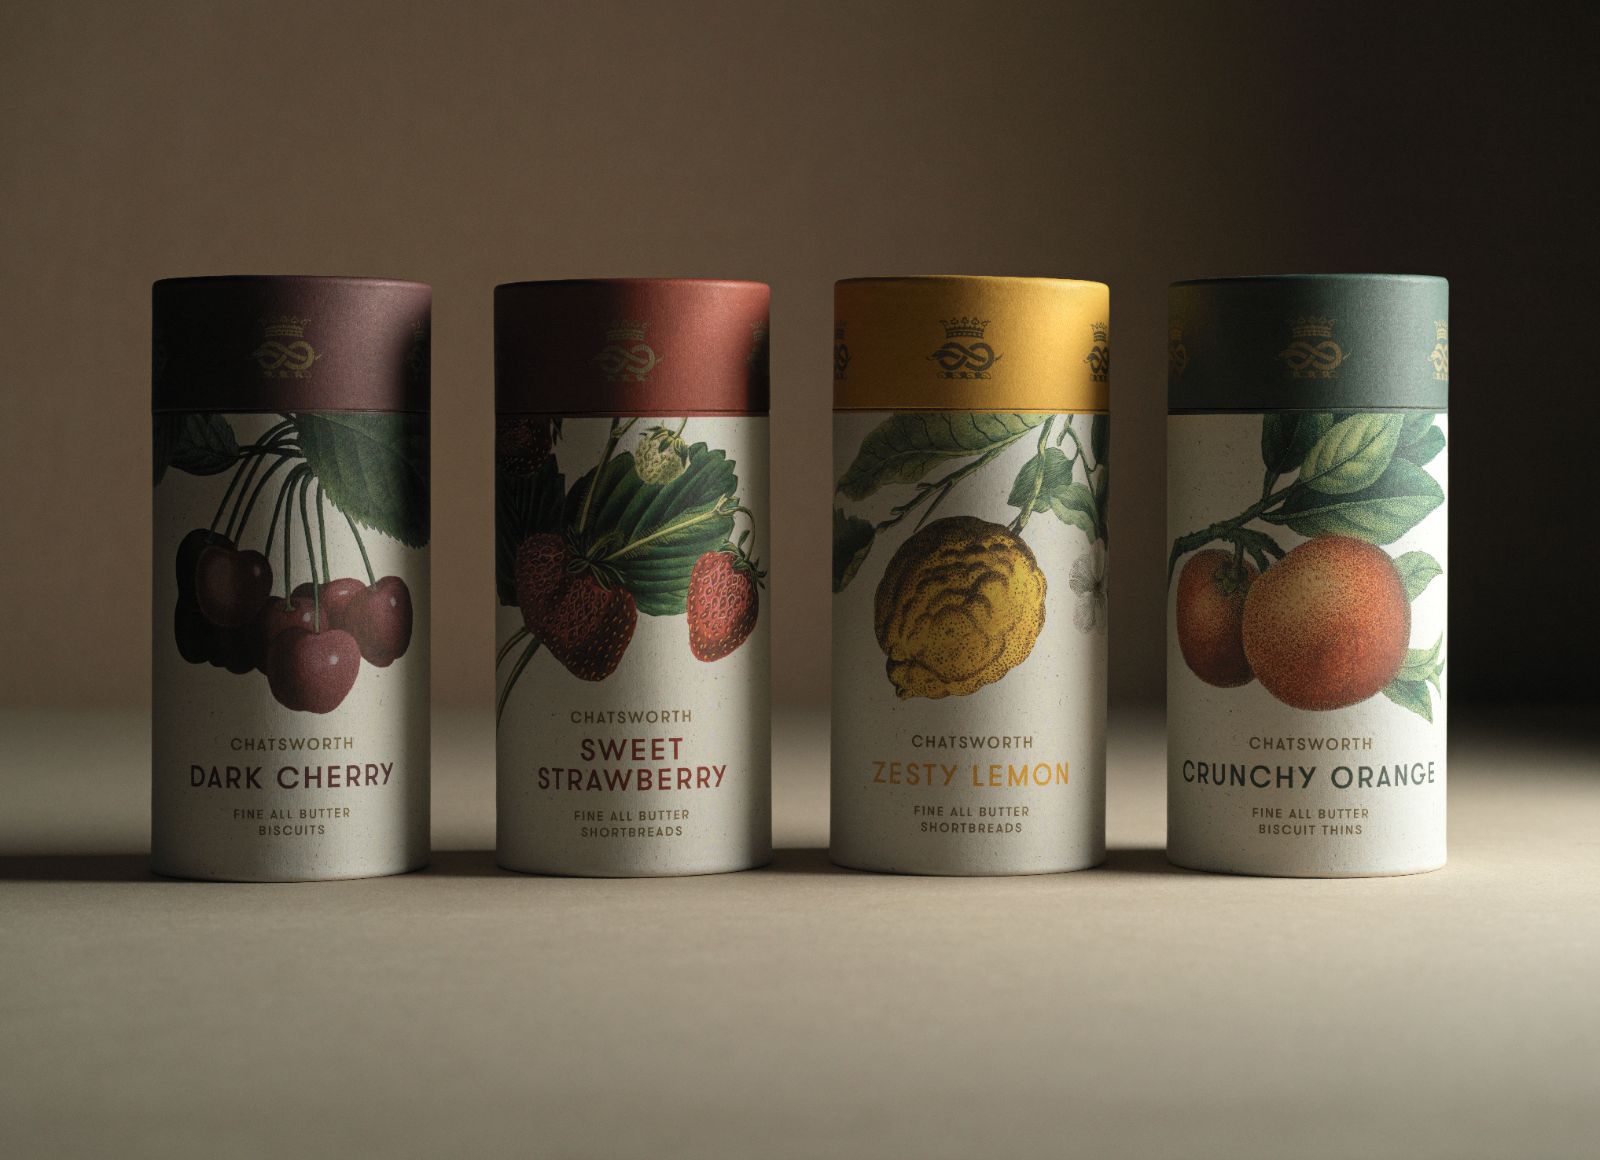 Full range of flavoured Chatsworth Artisan Biscuits. Vertical packaging with botanical illustrations across the side.